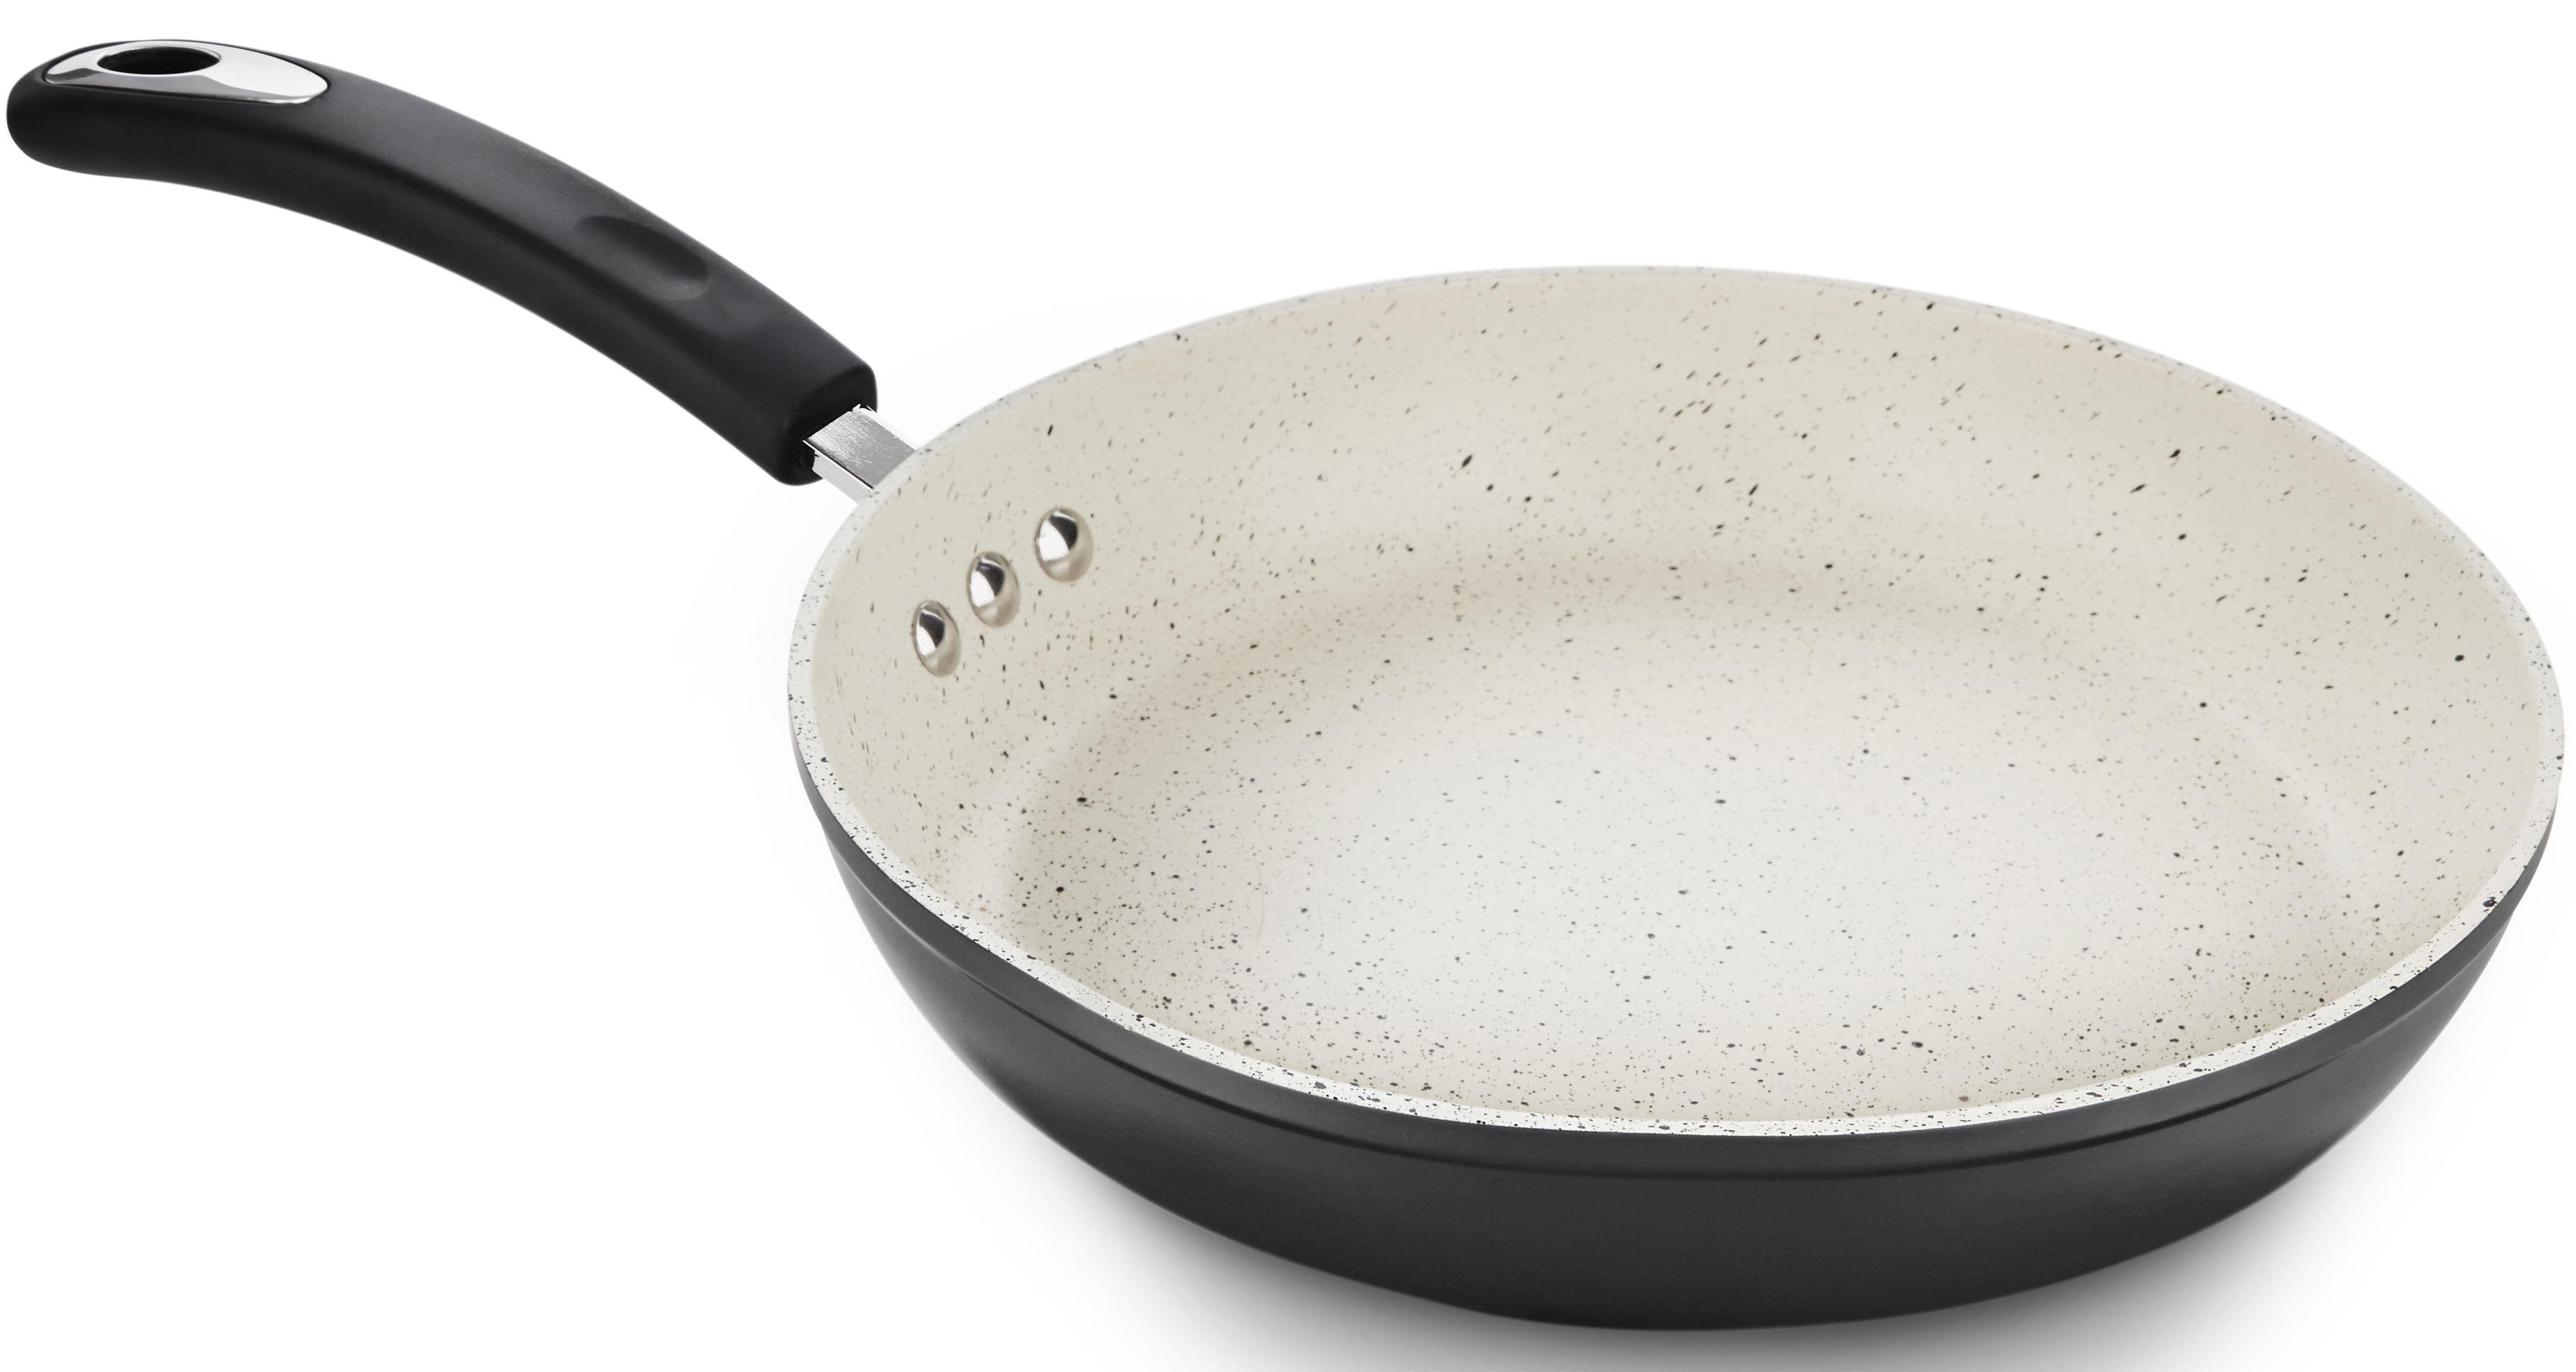 Warm Alabaster Ozeri ZP18-26 10 Stone Earth Frying Pan 100% APEO & PFOA-Free Stone-Derived Non-Stick Coating from Germany 